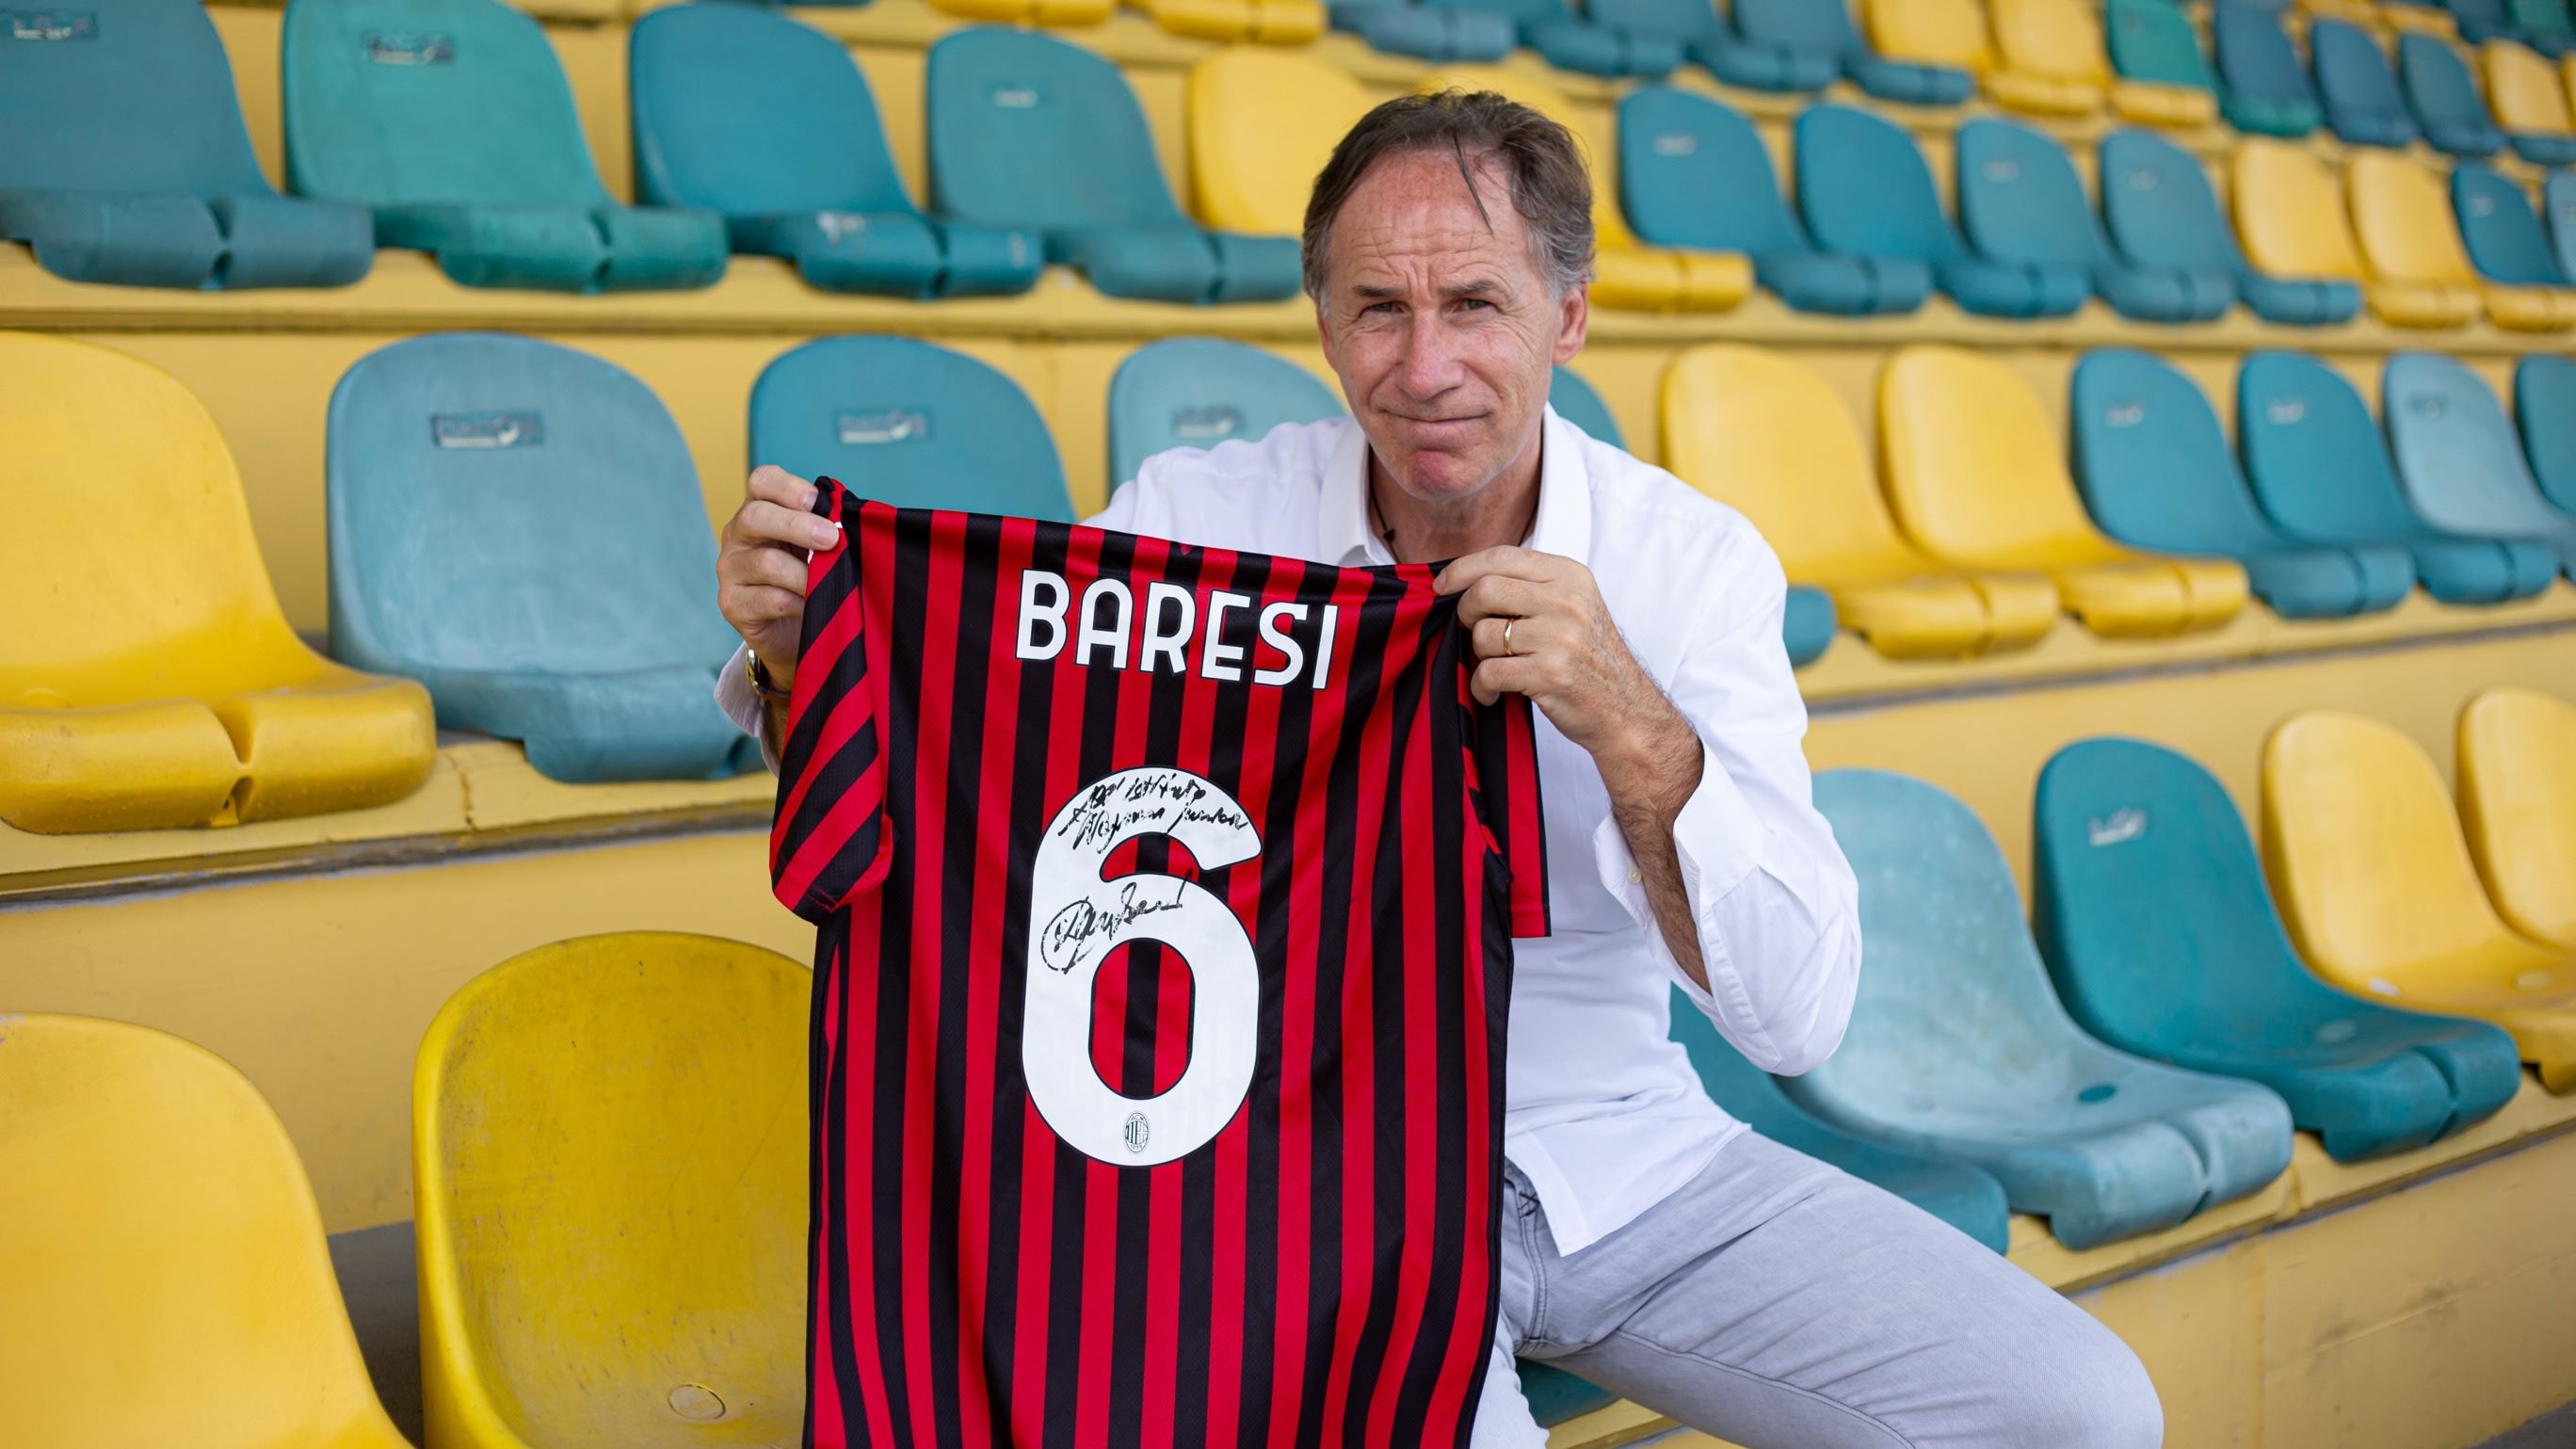 18-facts-about-franco-baresi